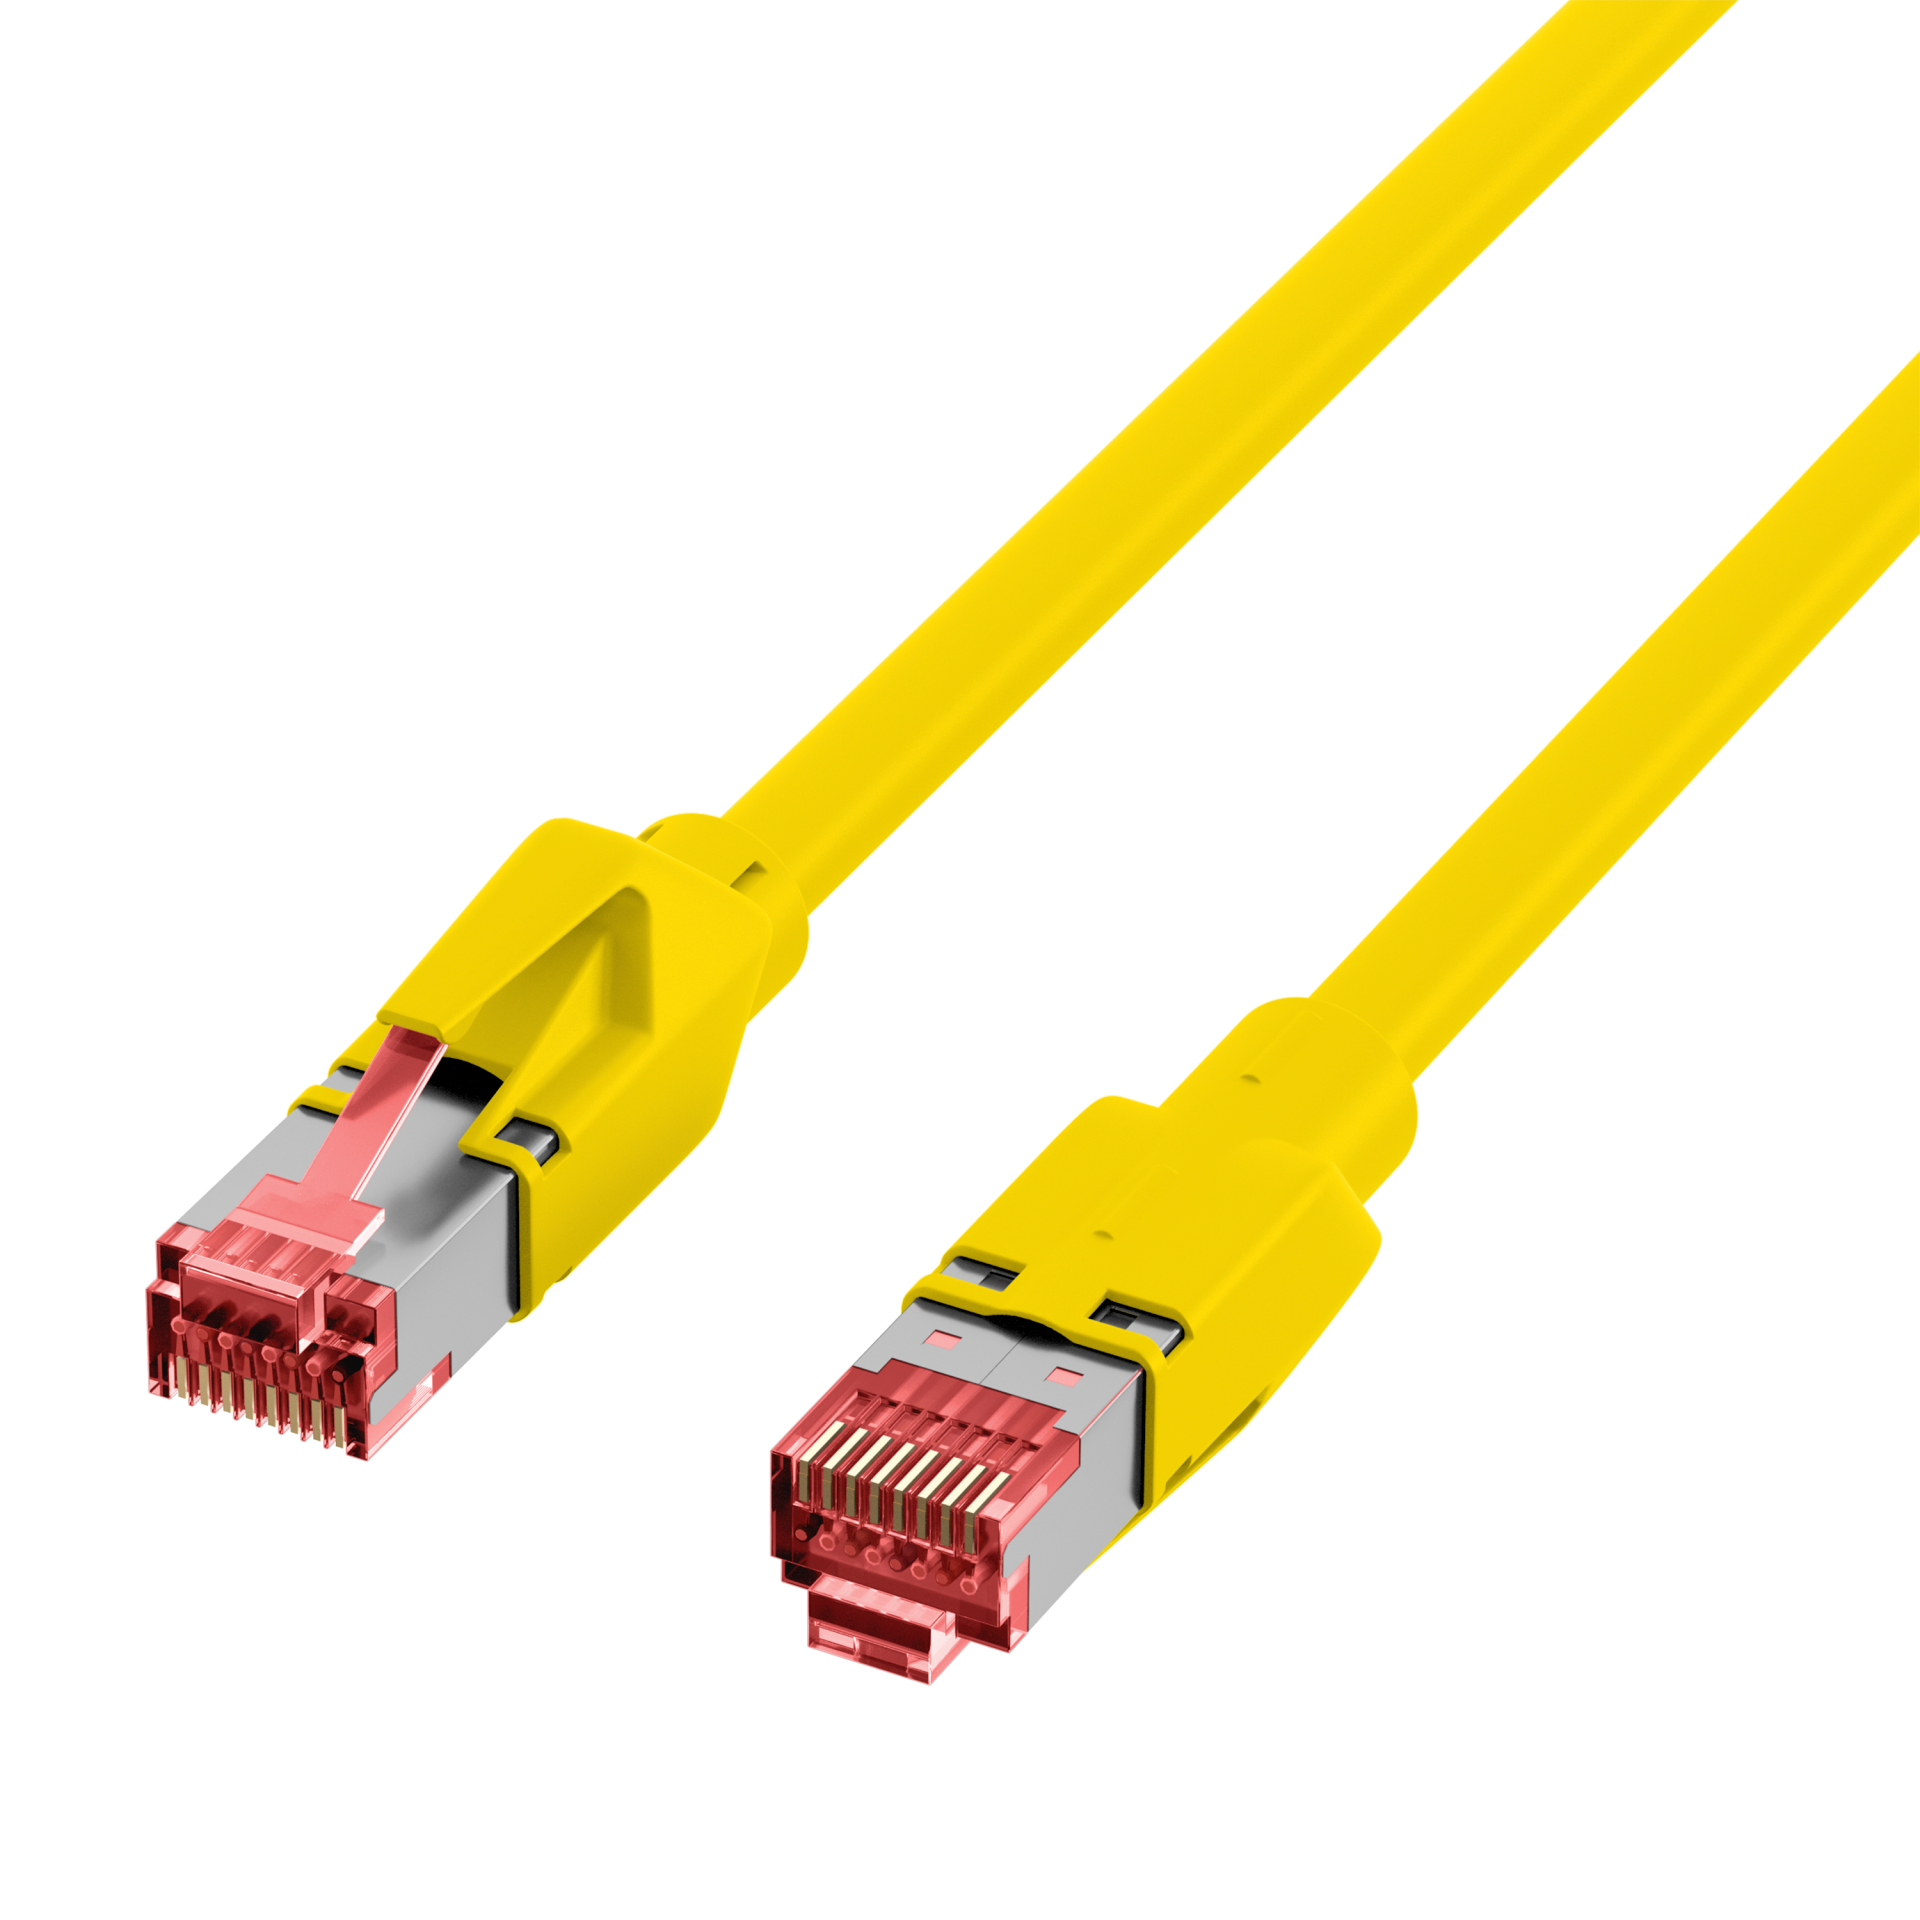 RJ45 Patch Cord Cat.5e S/UTP PUR TM21 for drag chains yellow 10m